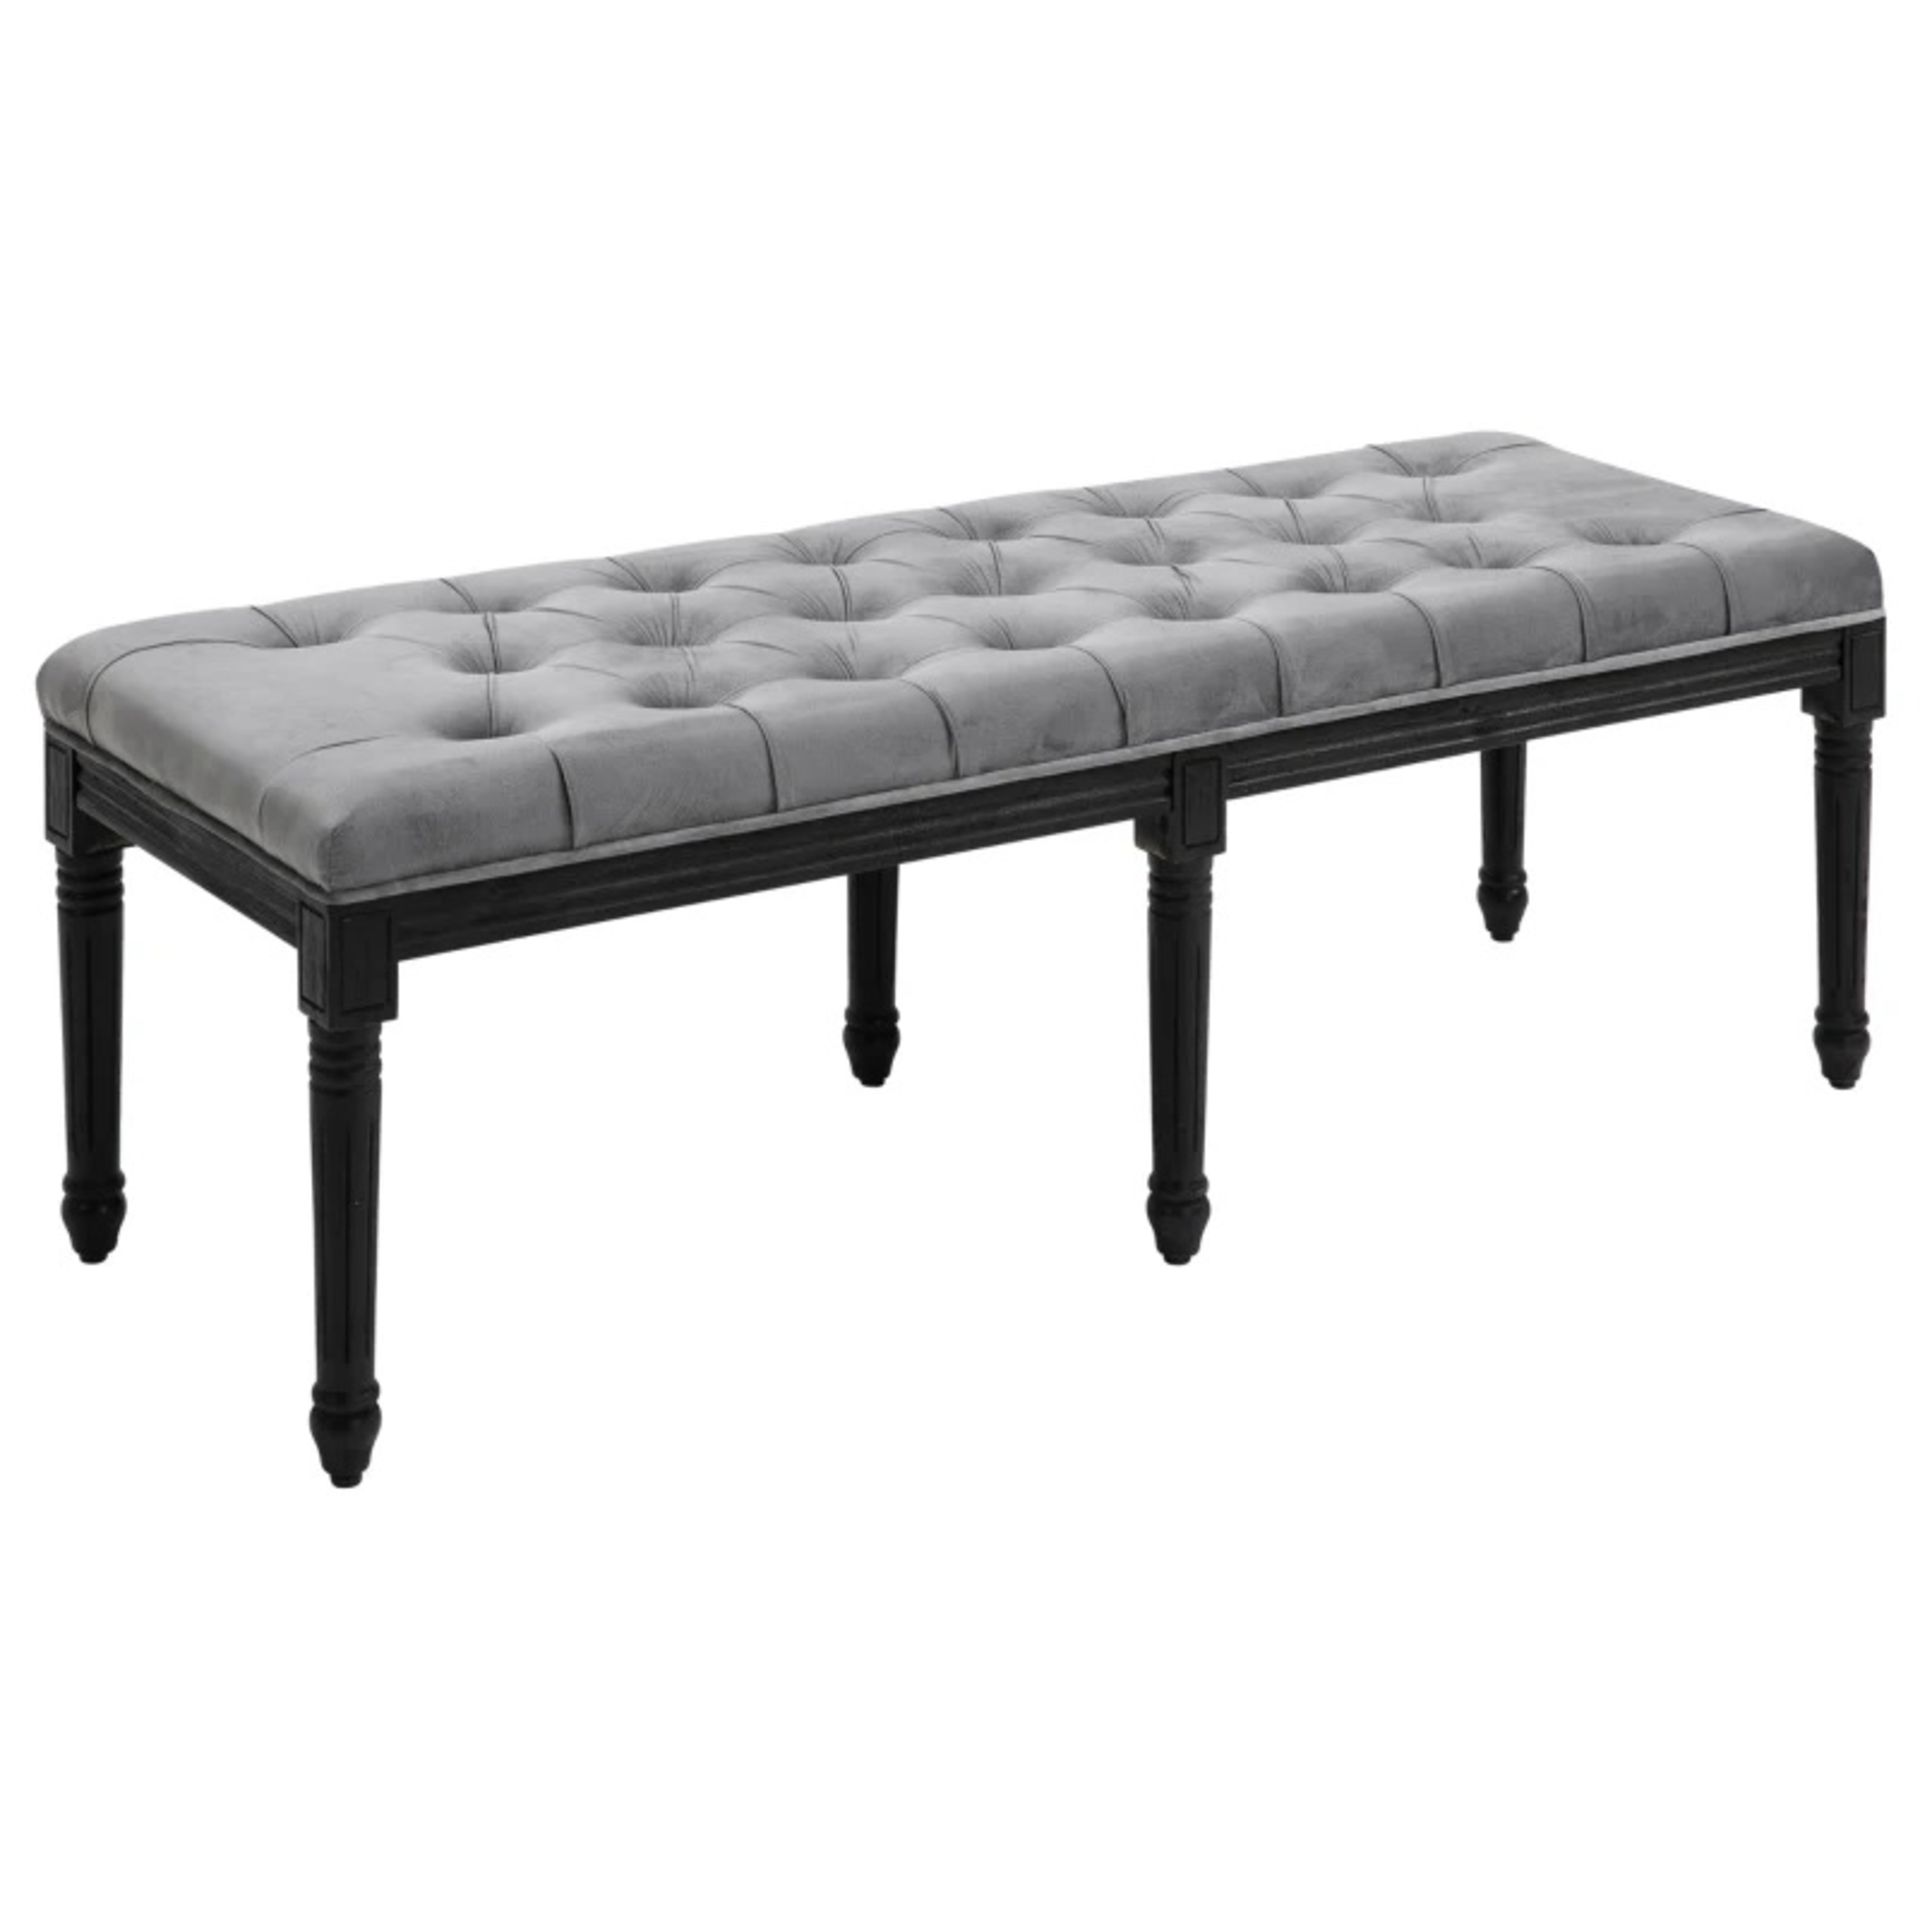 Fabric Bed End Bench Velvet Upholstered Tufted Accent Lounge Sofa Window Seat The top is padded to